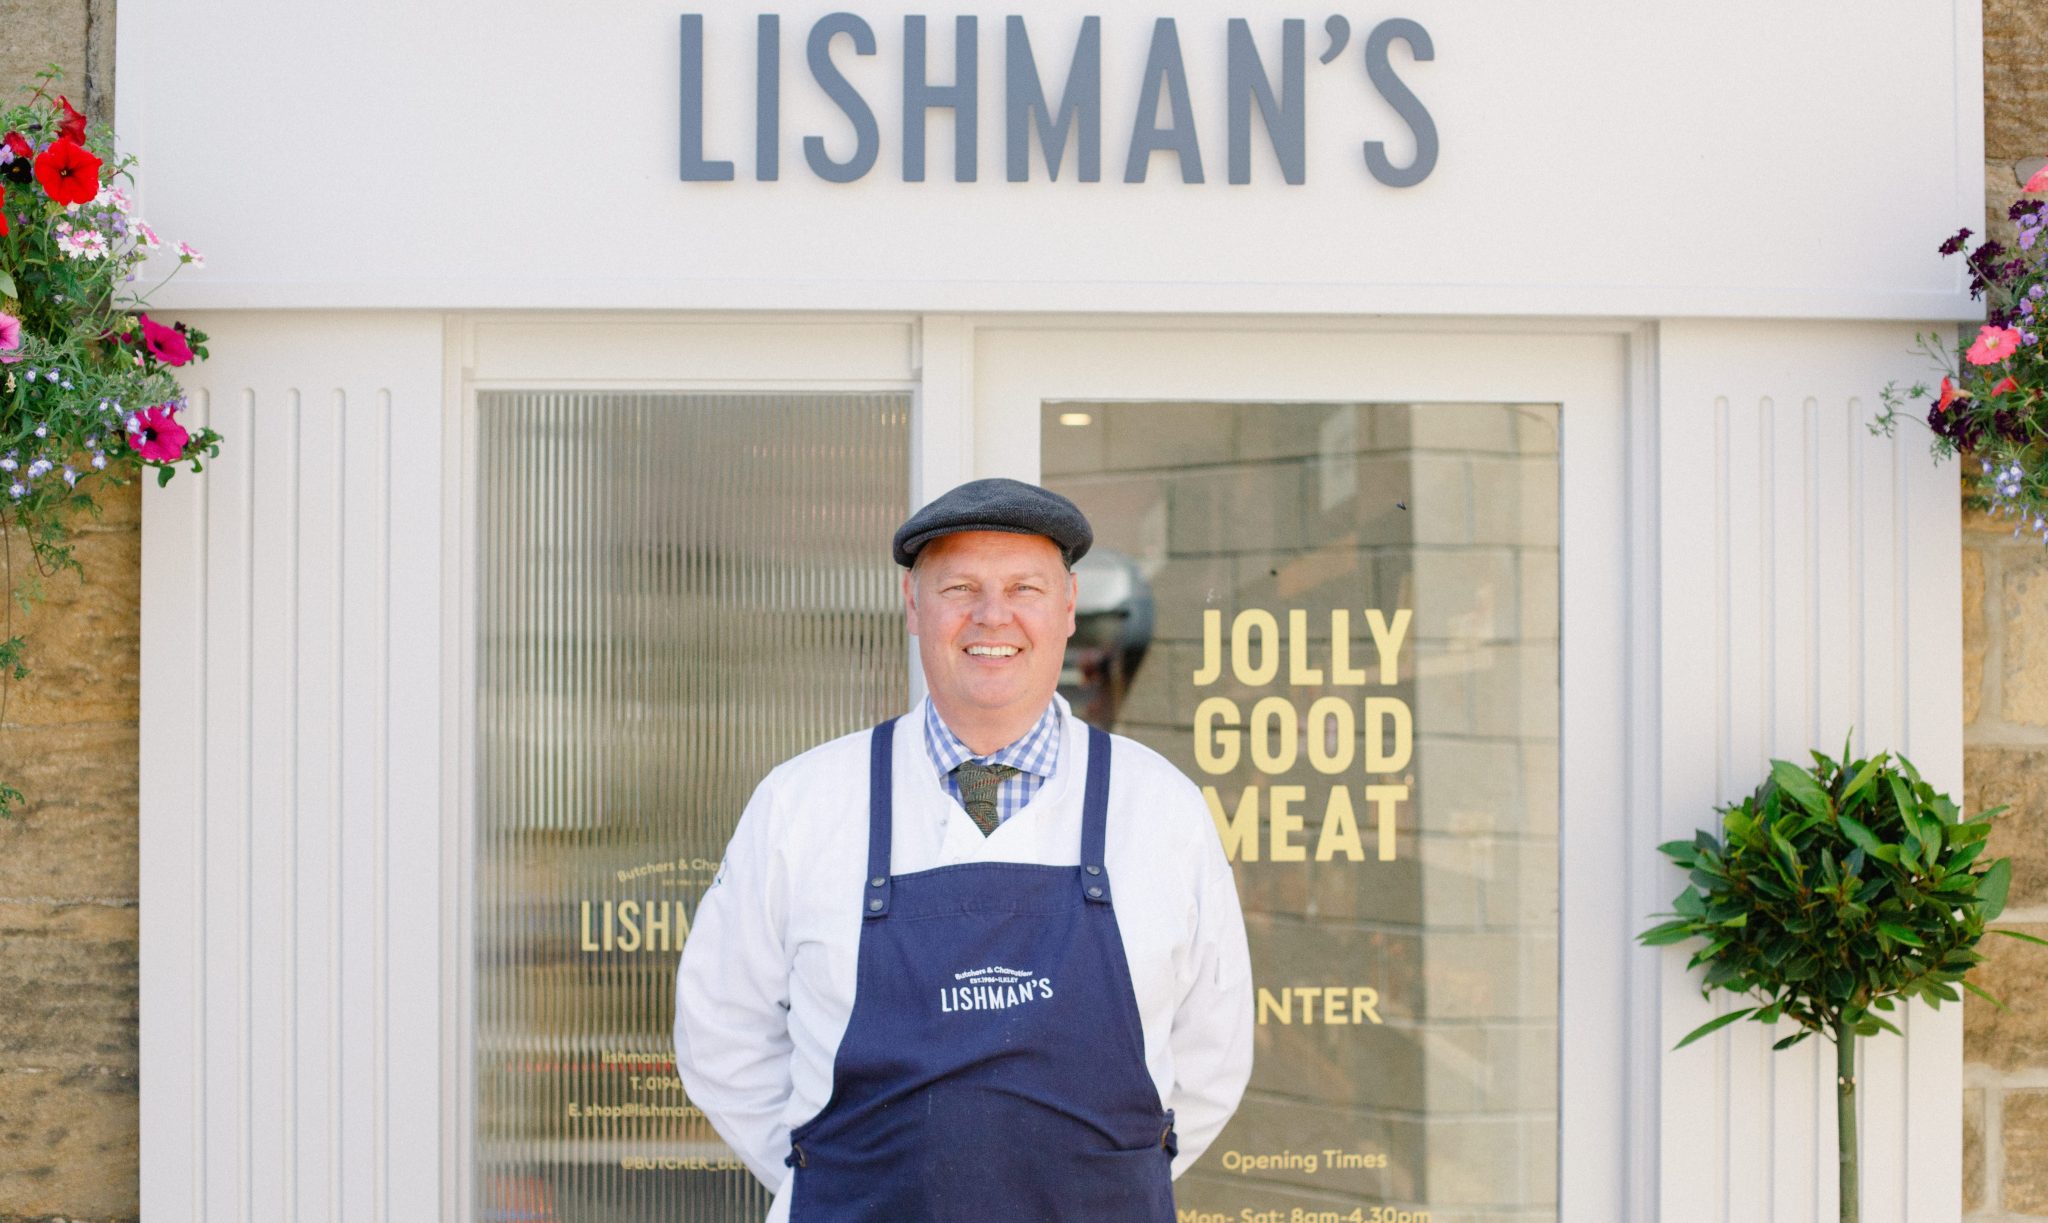 Congratulations to member David Lishman on his appointment to Head Judge of The World Butchers Challenge in Paris 2025